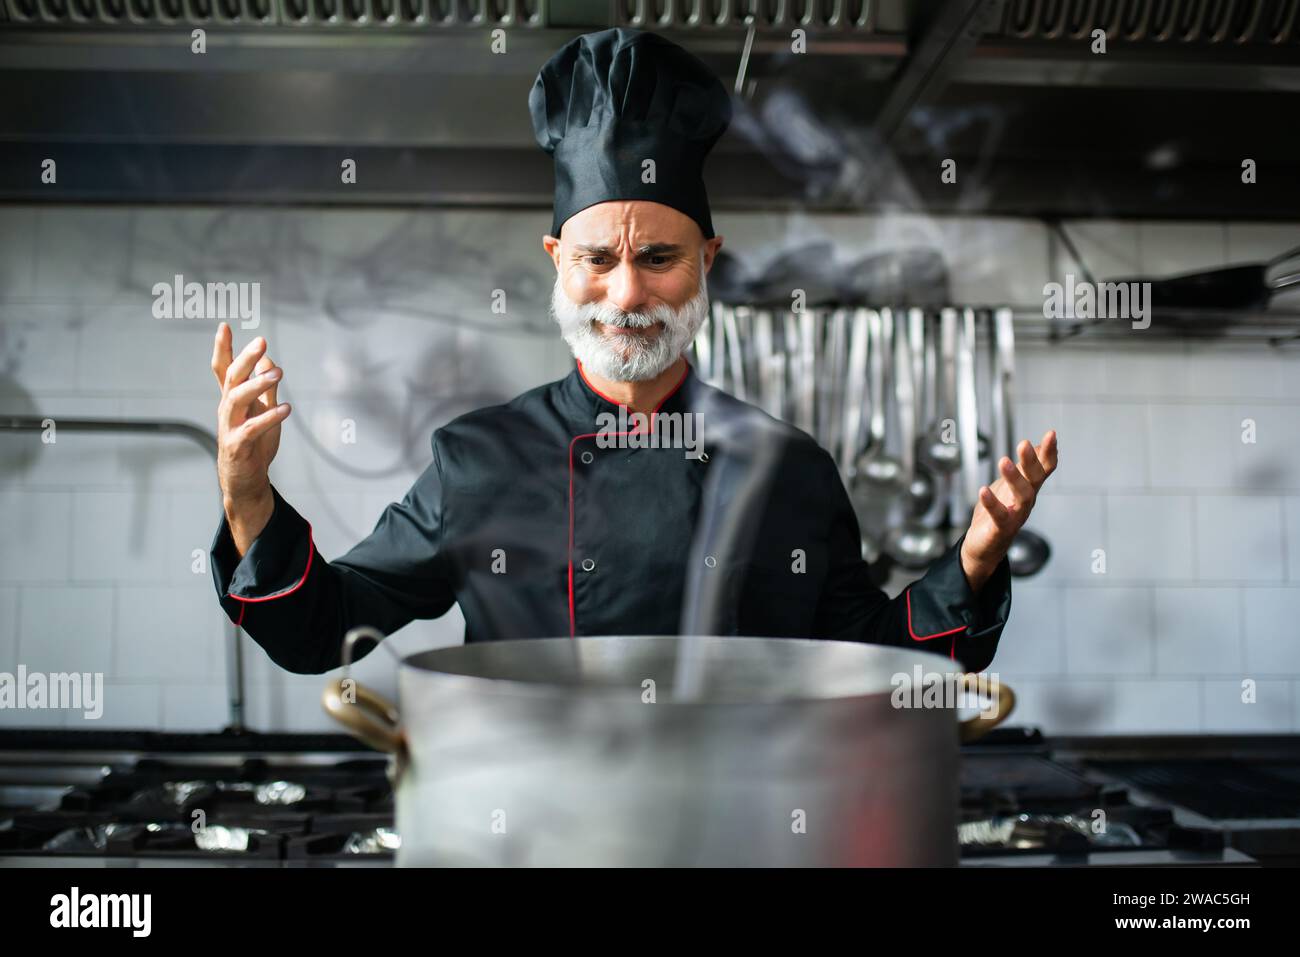 Clumsy chef doing disasters while cooking Stock Photo